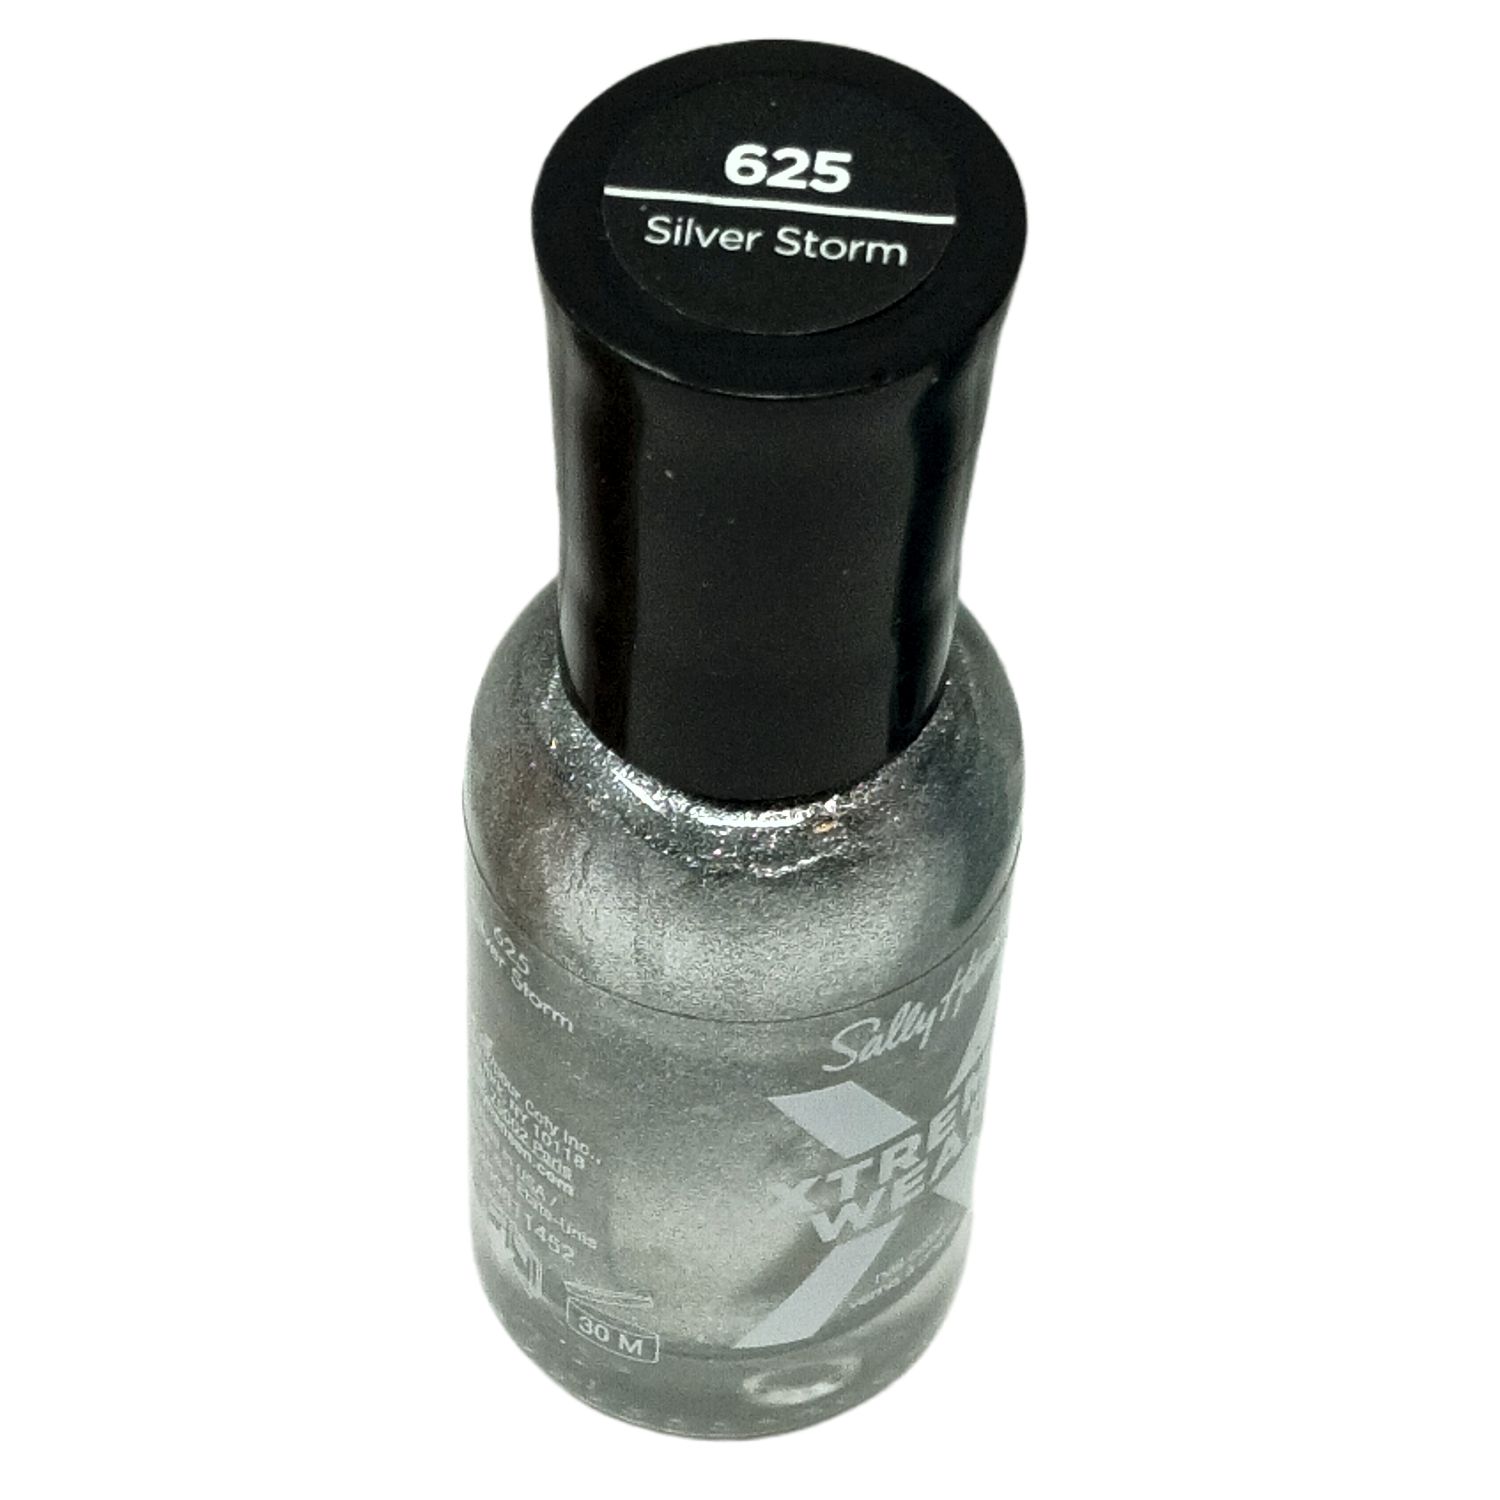 Sally Hansen Xtreme Wear Nail Polish, Silver Storm, 0.4 oz, Chip Resistant, Bold Color - image 3 of 6